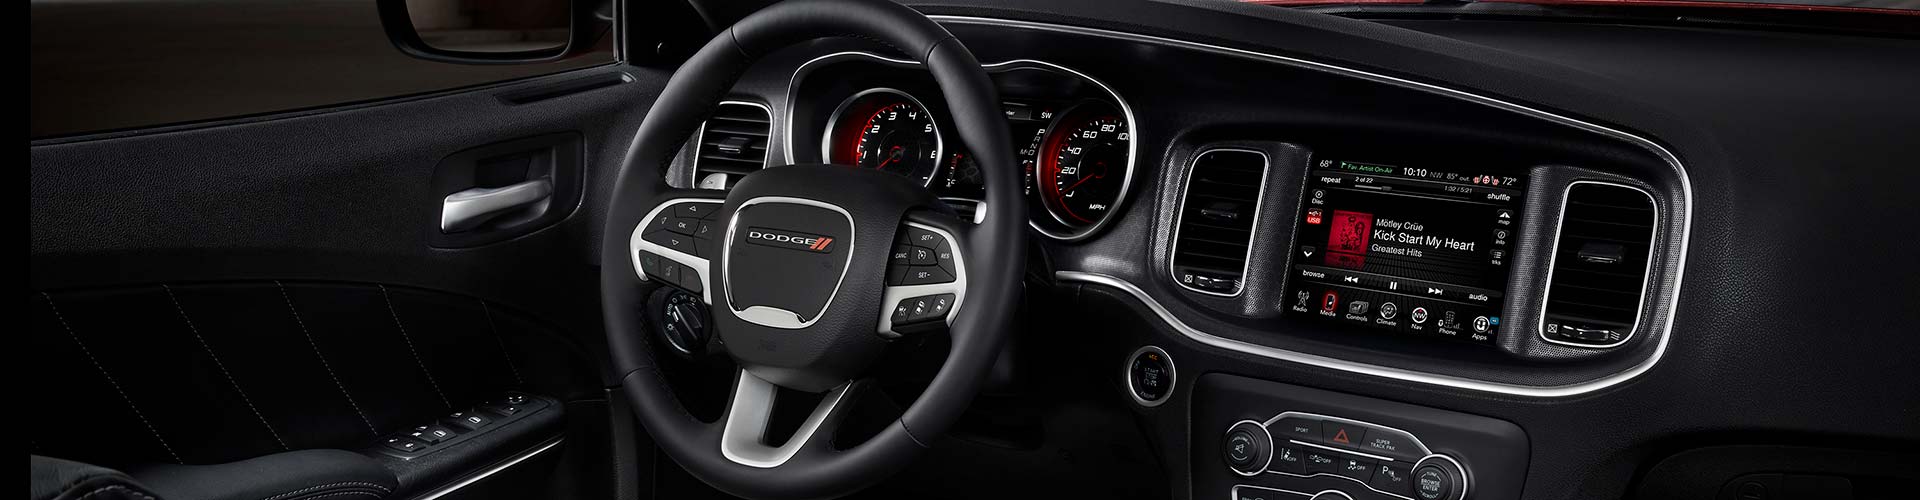 2019 Dodge Charger Interieur Aec Europe